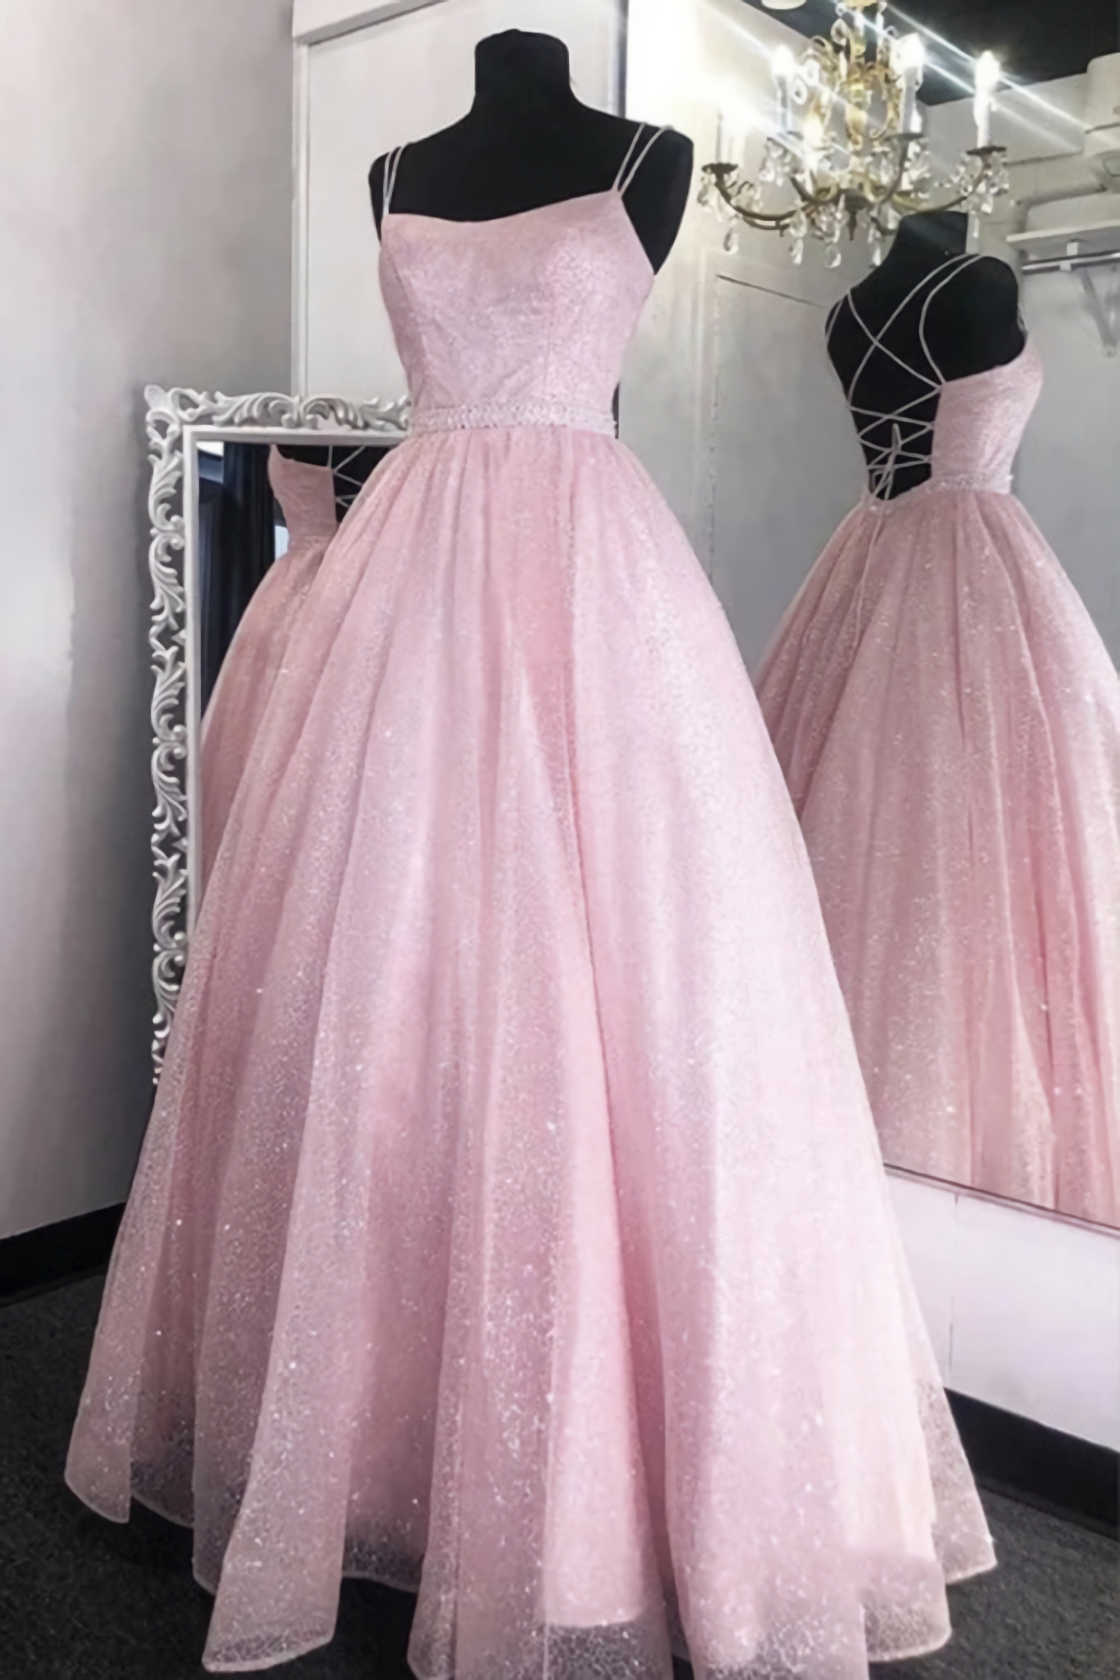 Party Dresses For Girl, Shiny Backless Pink Sequins Long Prom Dress, Pink Formal Evening Dress, Sparkly Ball Gown